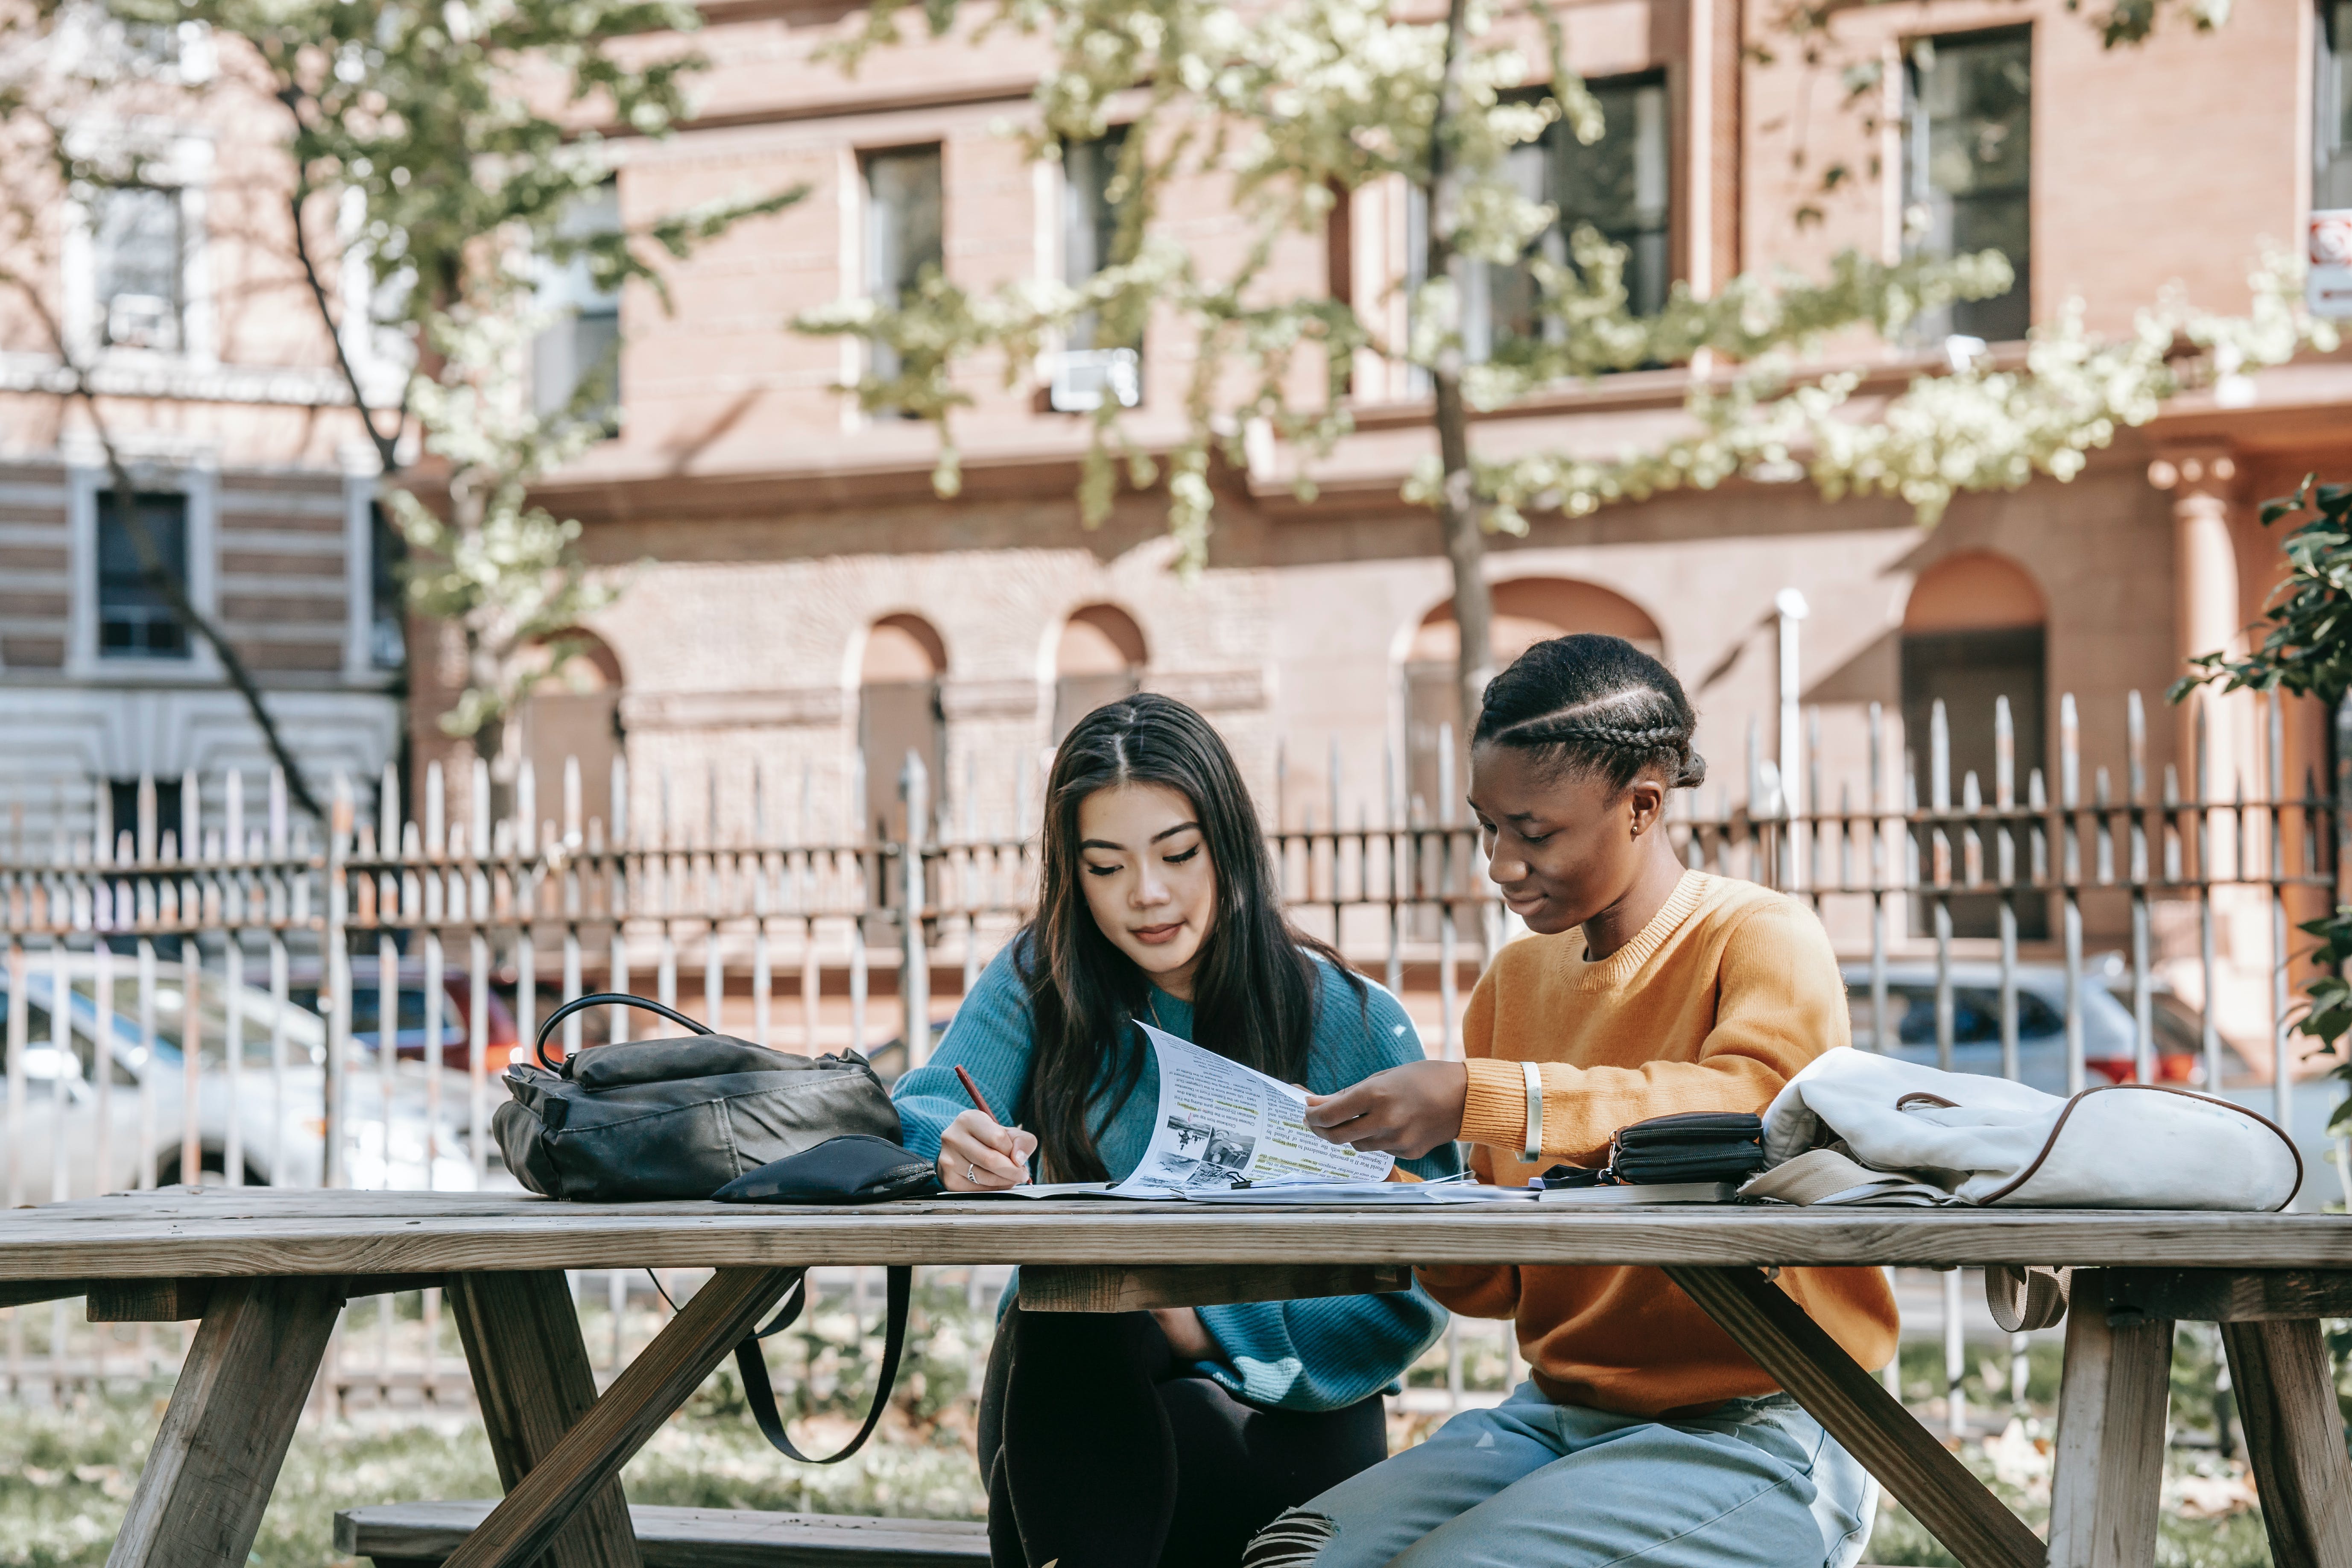 Would just cut this one down a bit: A photo of two young women sitting at a wooden picnic table outdoors, focused on papers and a book in front of them. One woman, wearing a blue sweater, is writing notes, while the other, in a yellow sweater, is reading a document. A black bag and a white pouch rest on the table.